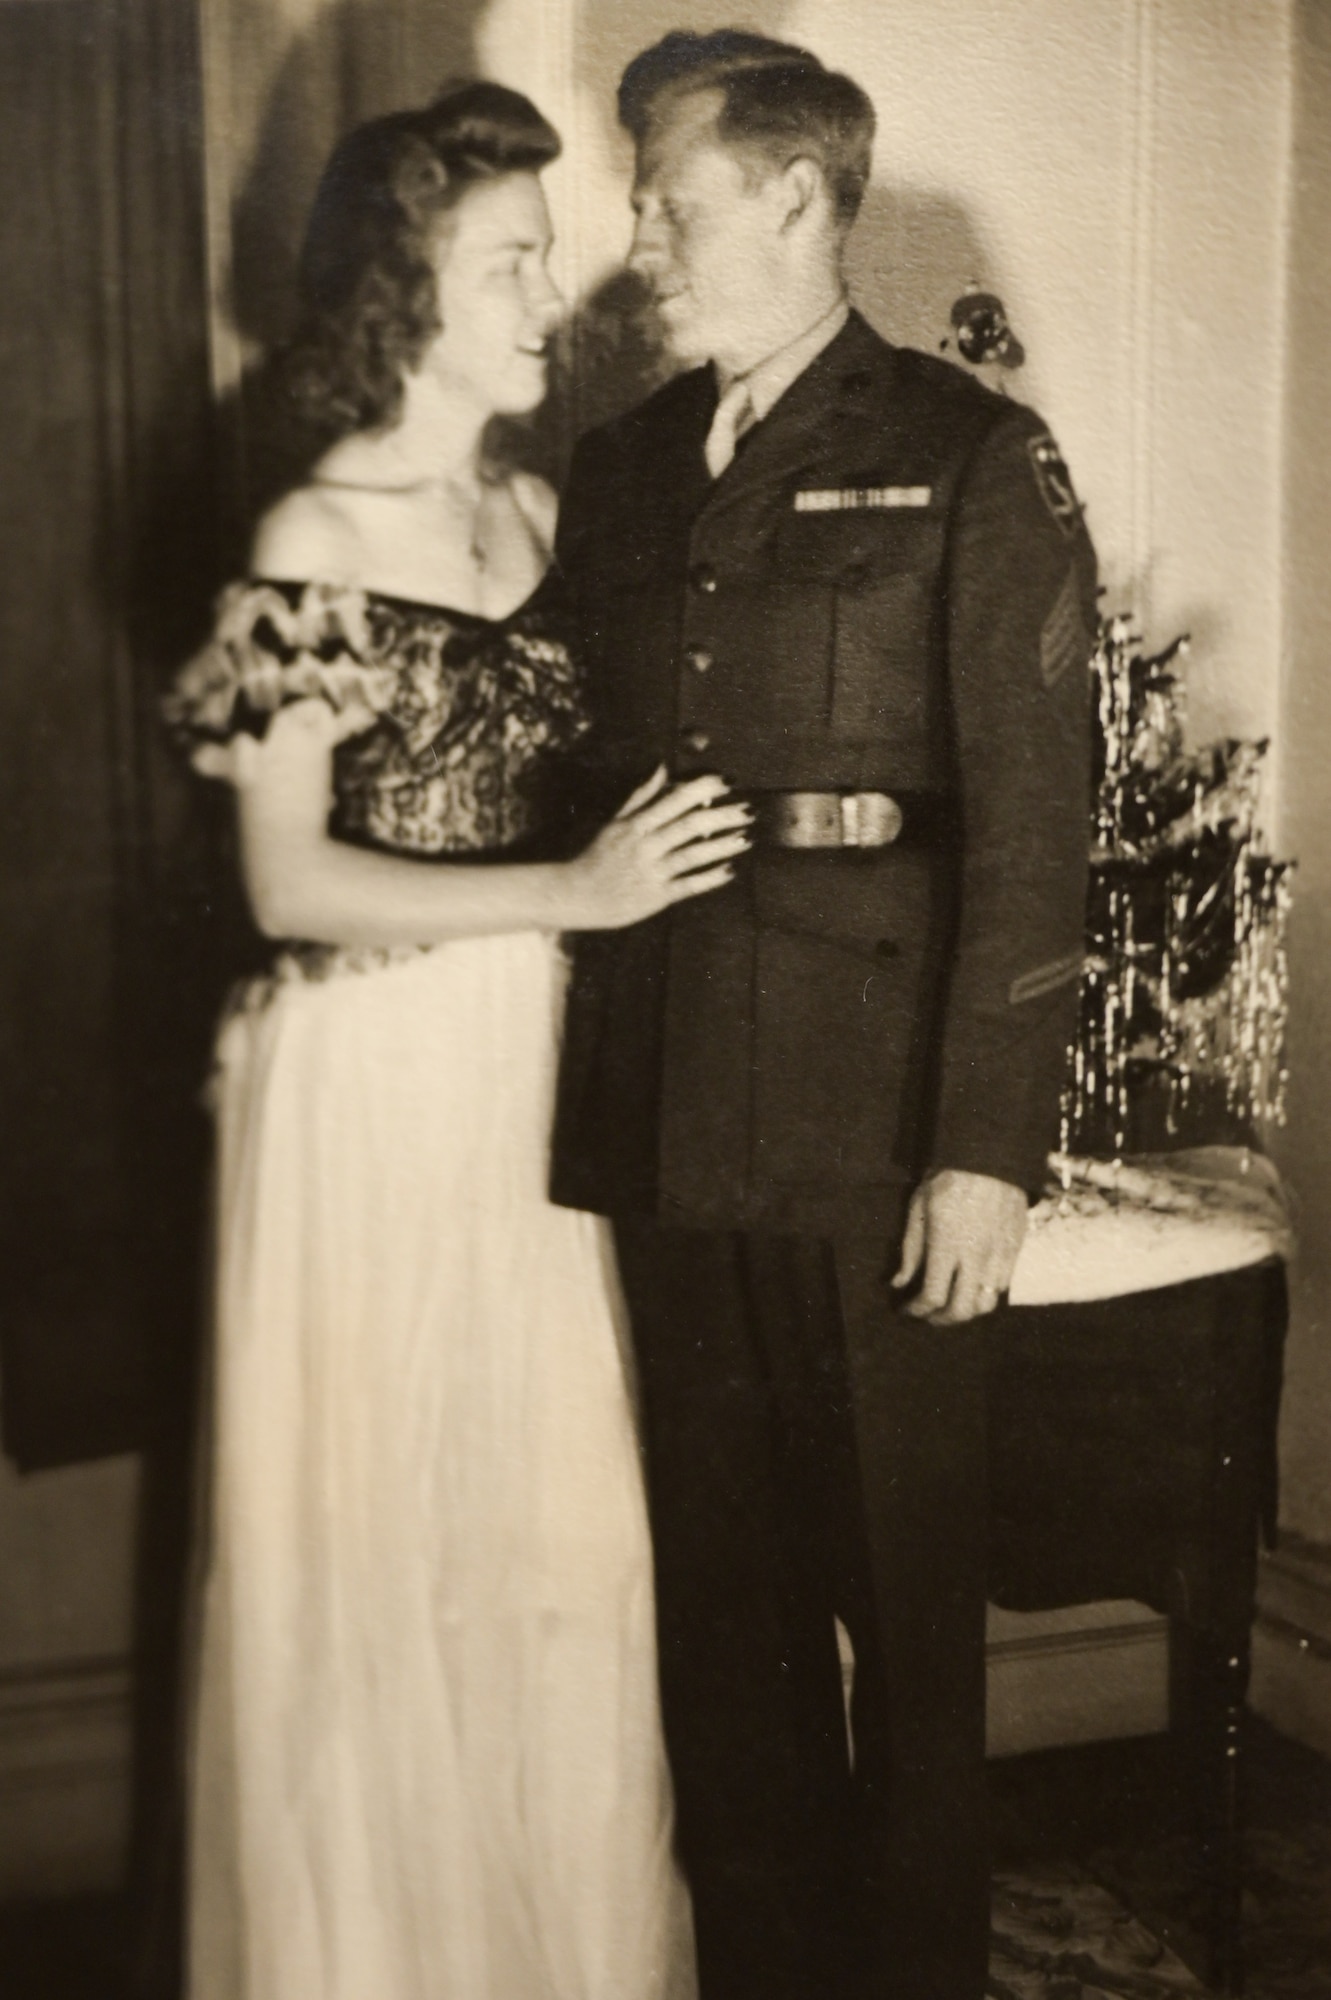 Fran Harris and her husband, Dub Harris, pose for a photo during his service in WWII. (Courtesy Photo)